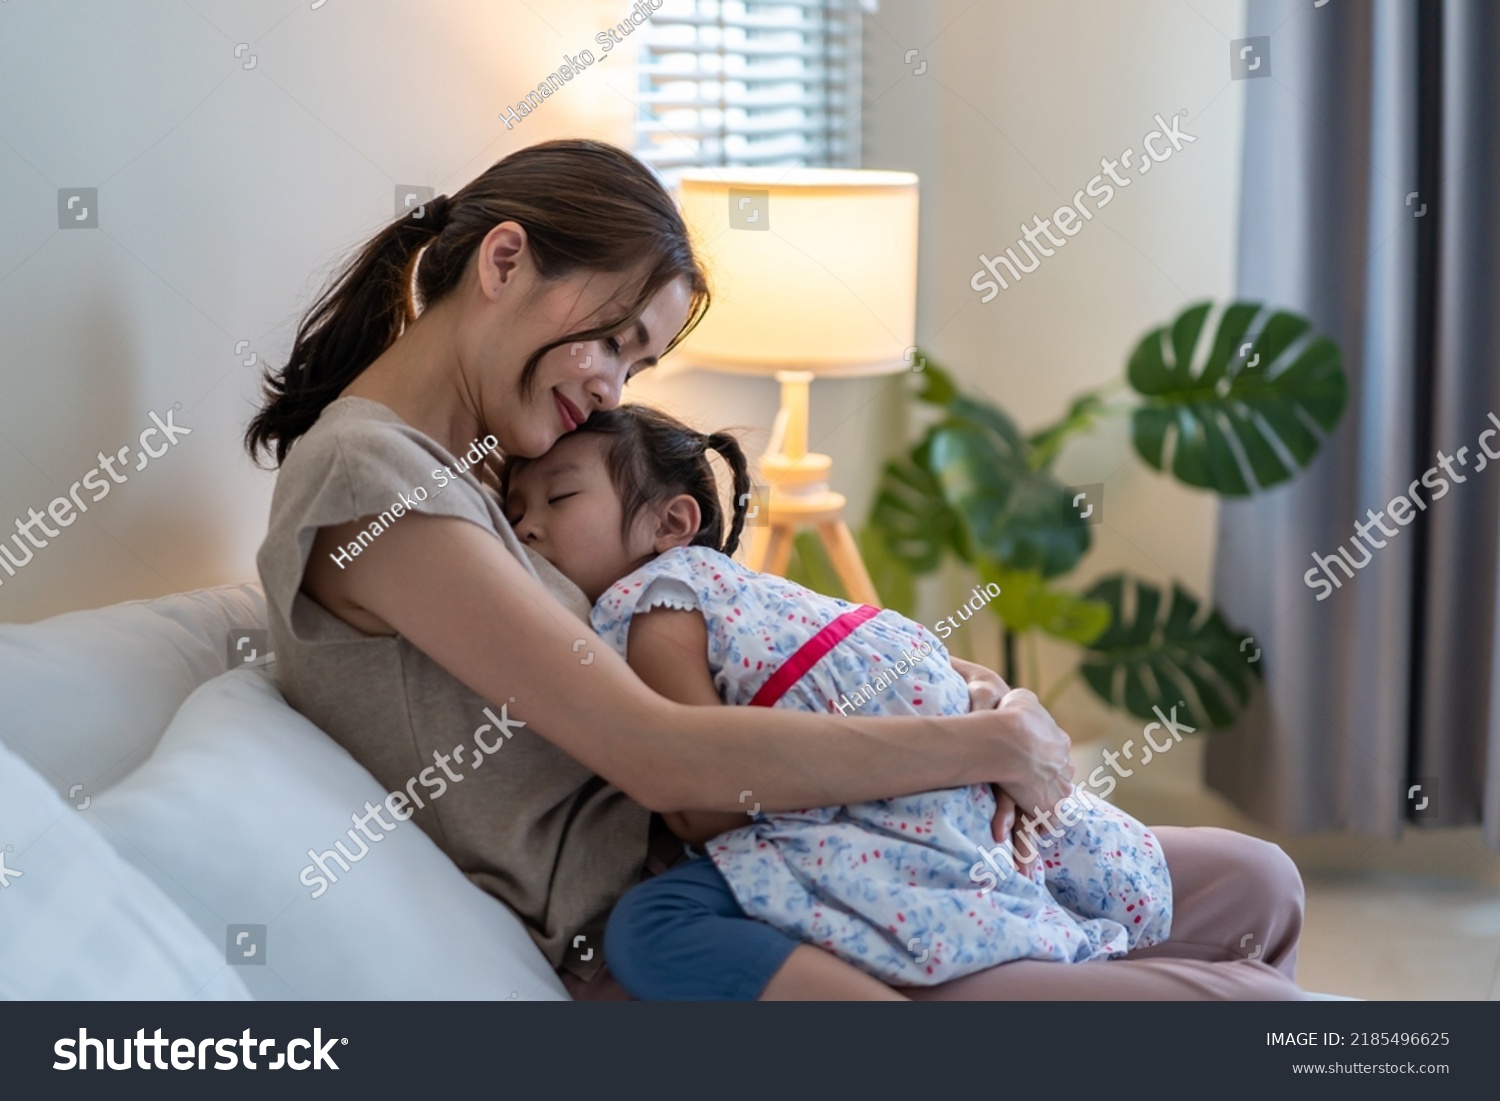 Asian beautiful mother hug sleeping baby girl in her arms with gently. Loving young parent holding small baby to rest on shoulder and sleep with young daughter. Parenting relationship at home concept. #2185496625